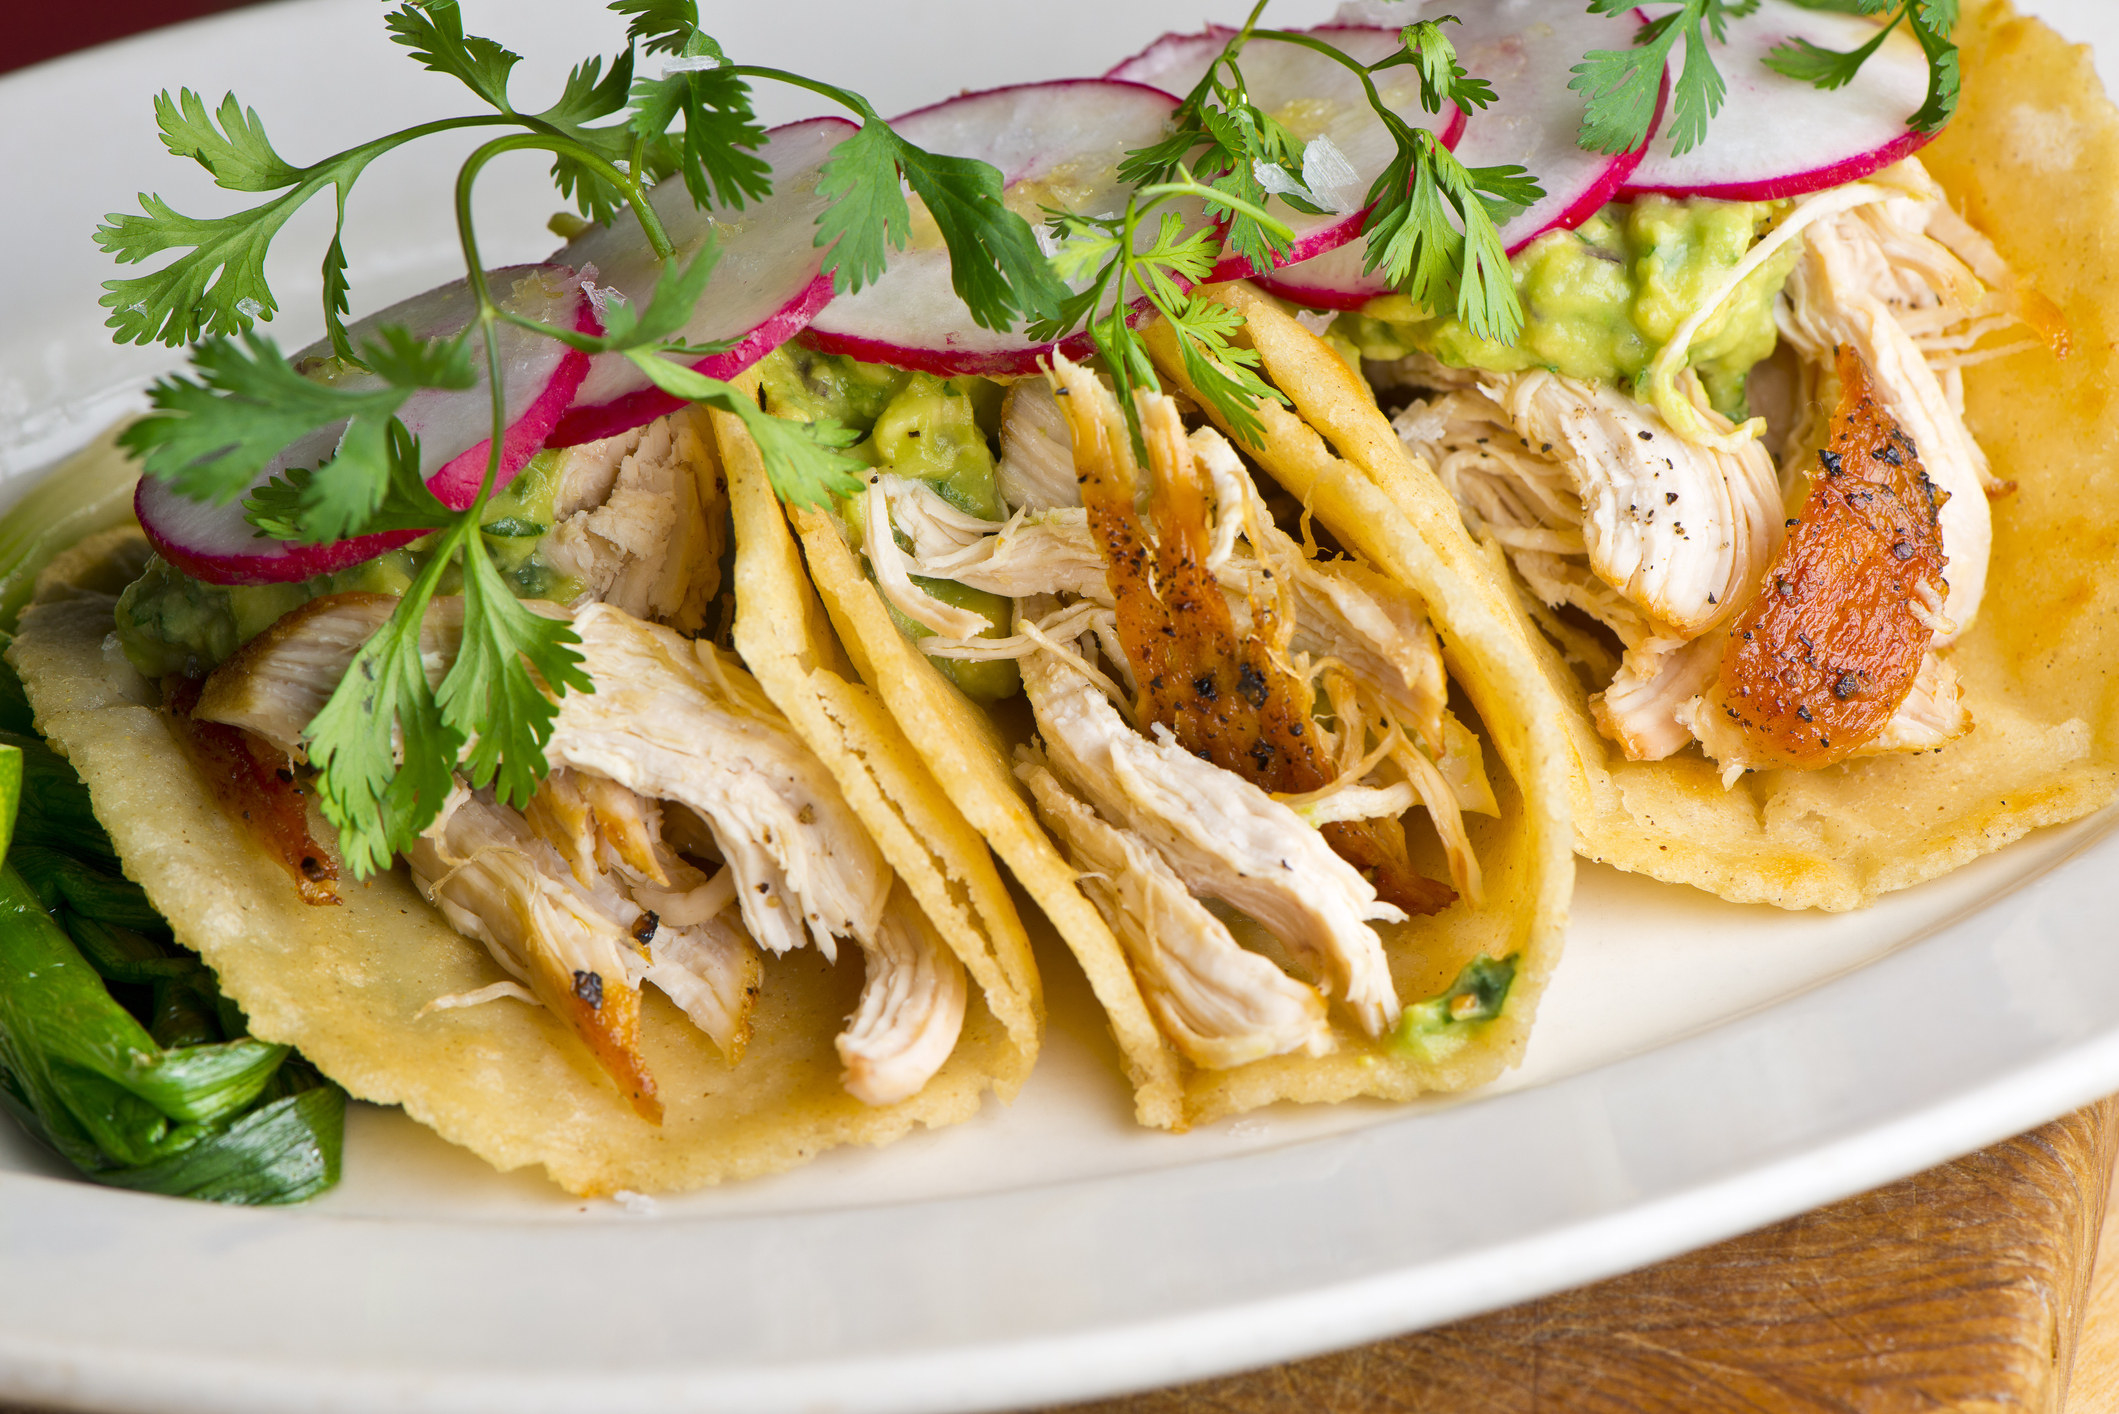 Three chicken tacos on a plate.